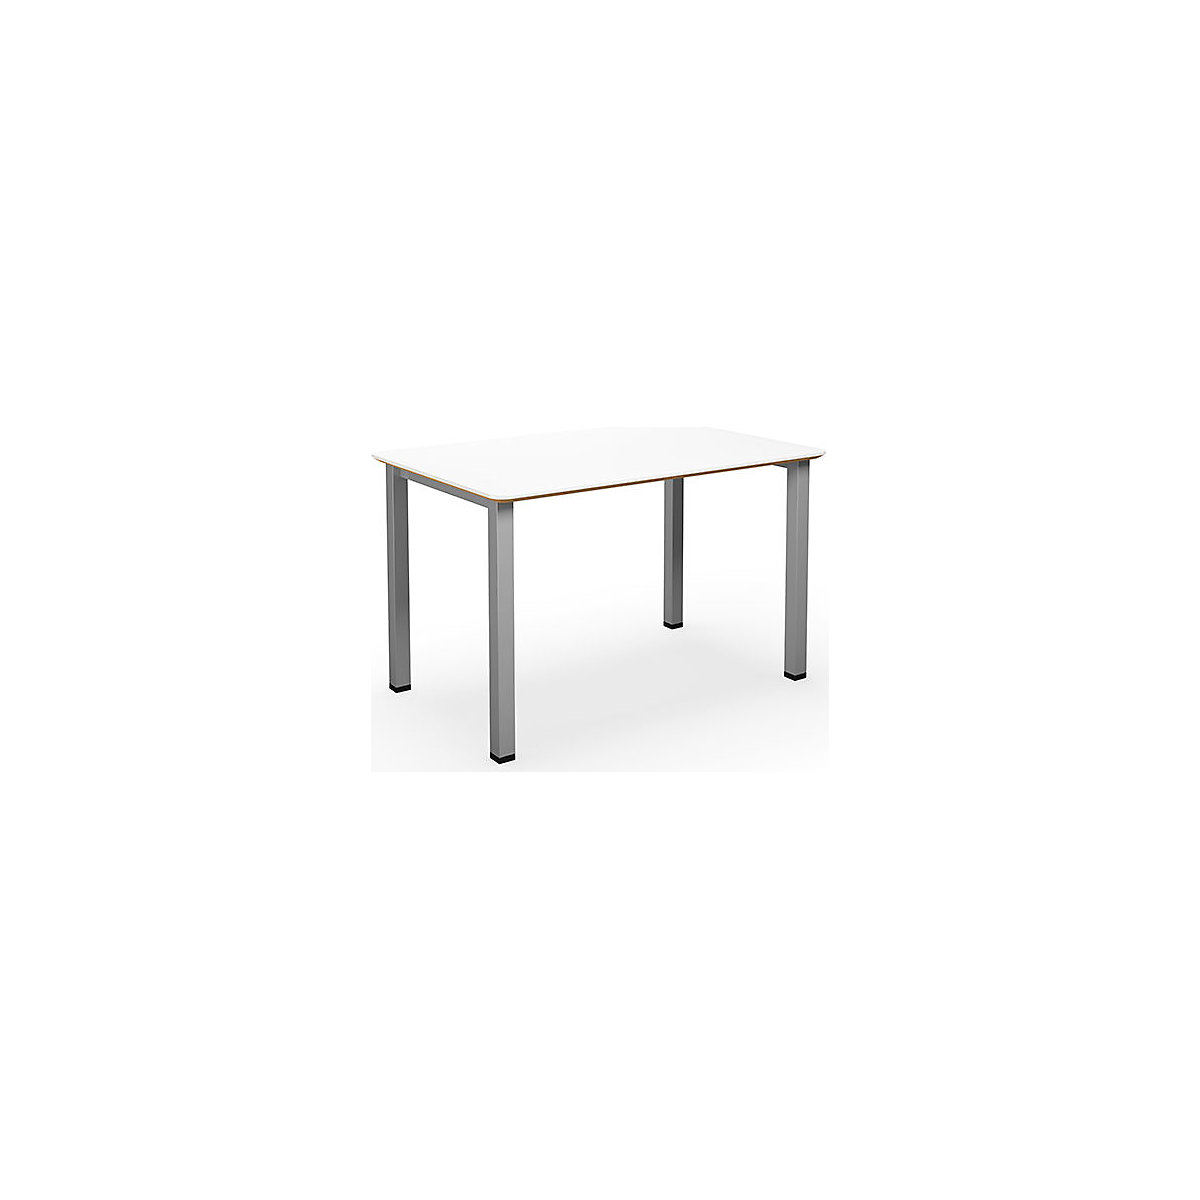 DUO-U Trend multi-purpose desk, straight tabletop, rounded corners, WxD 1200 x 800 mm, white, silver-4